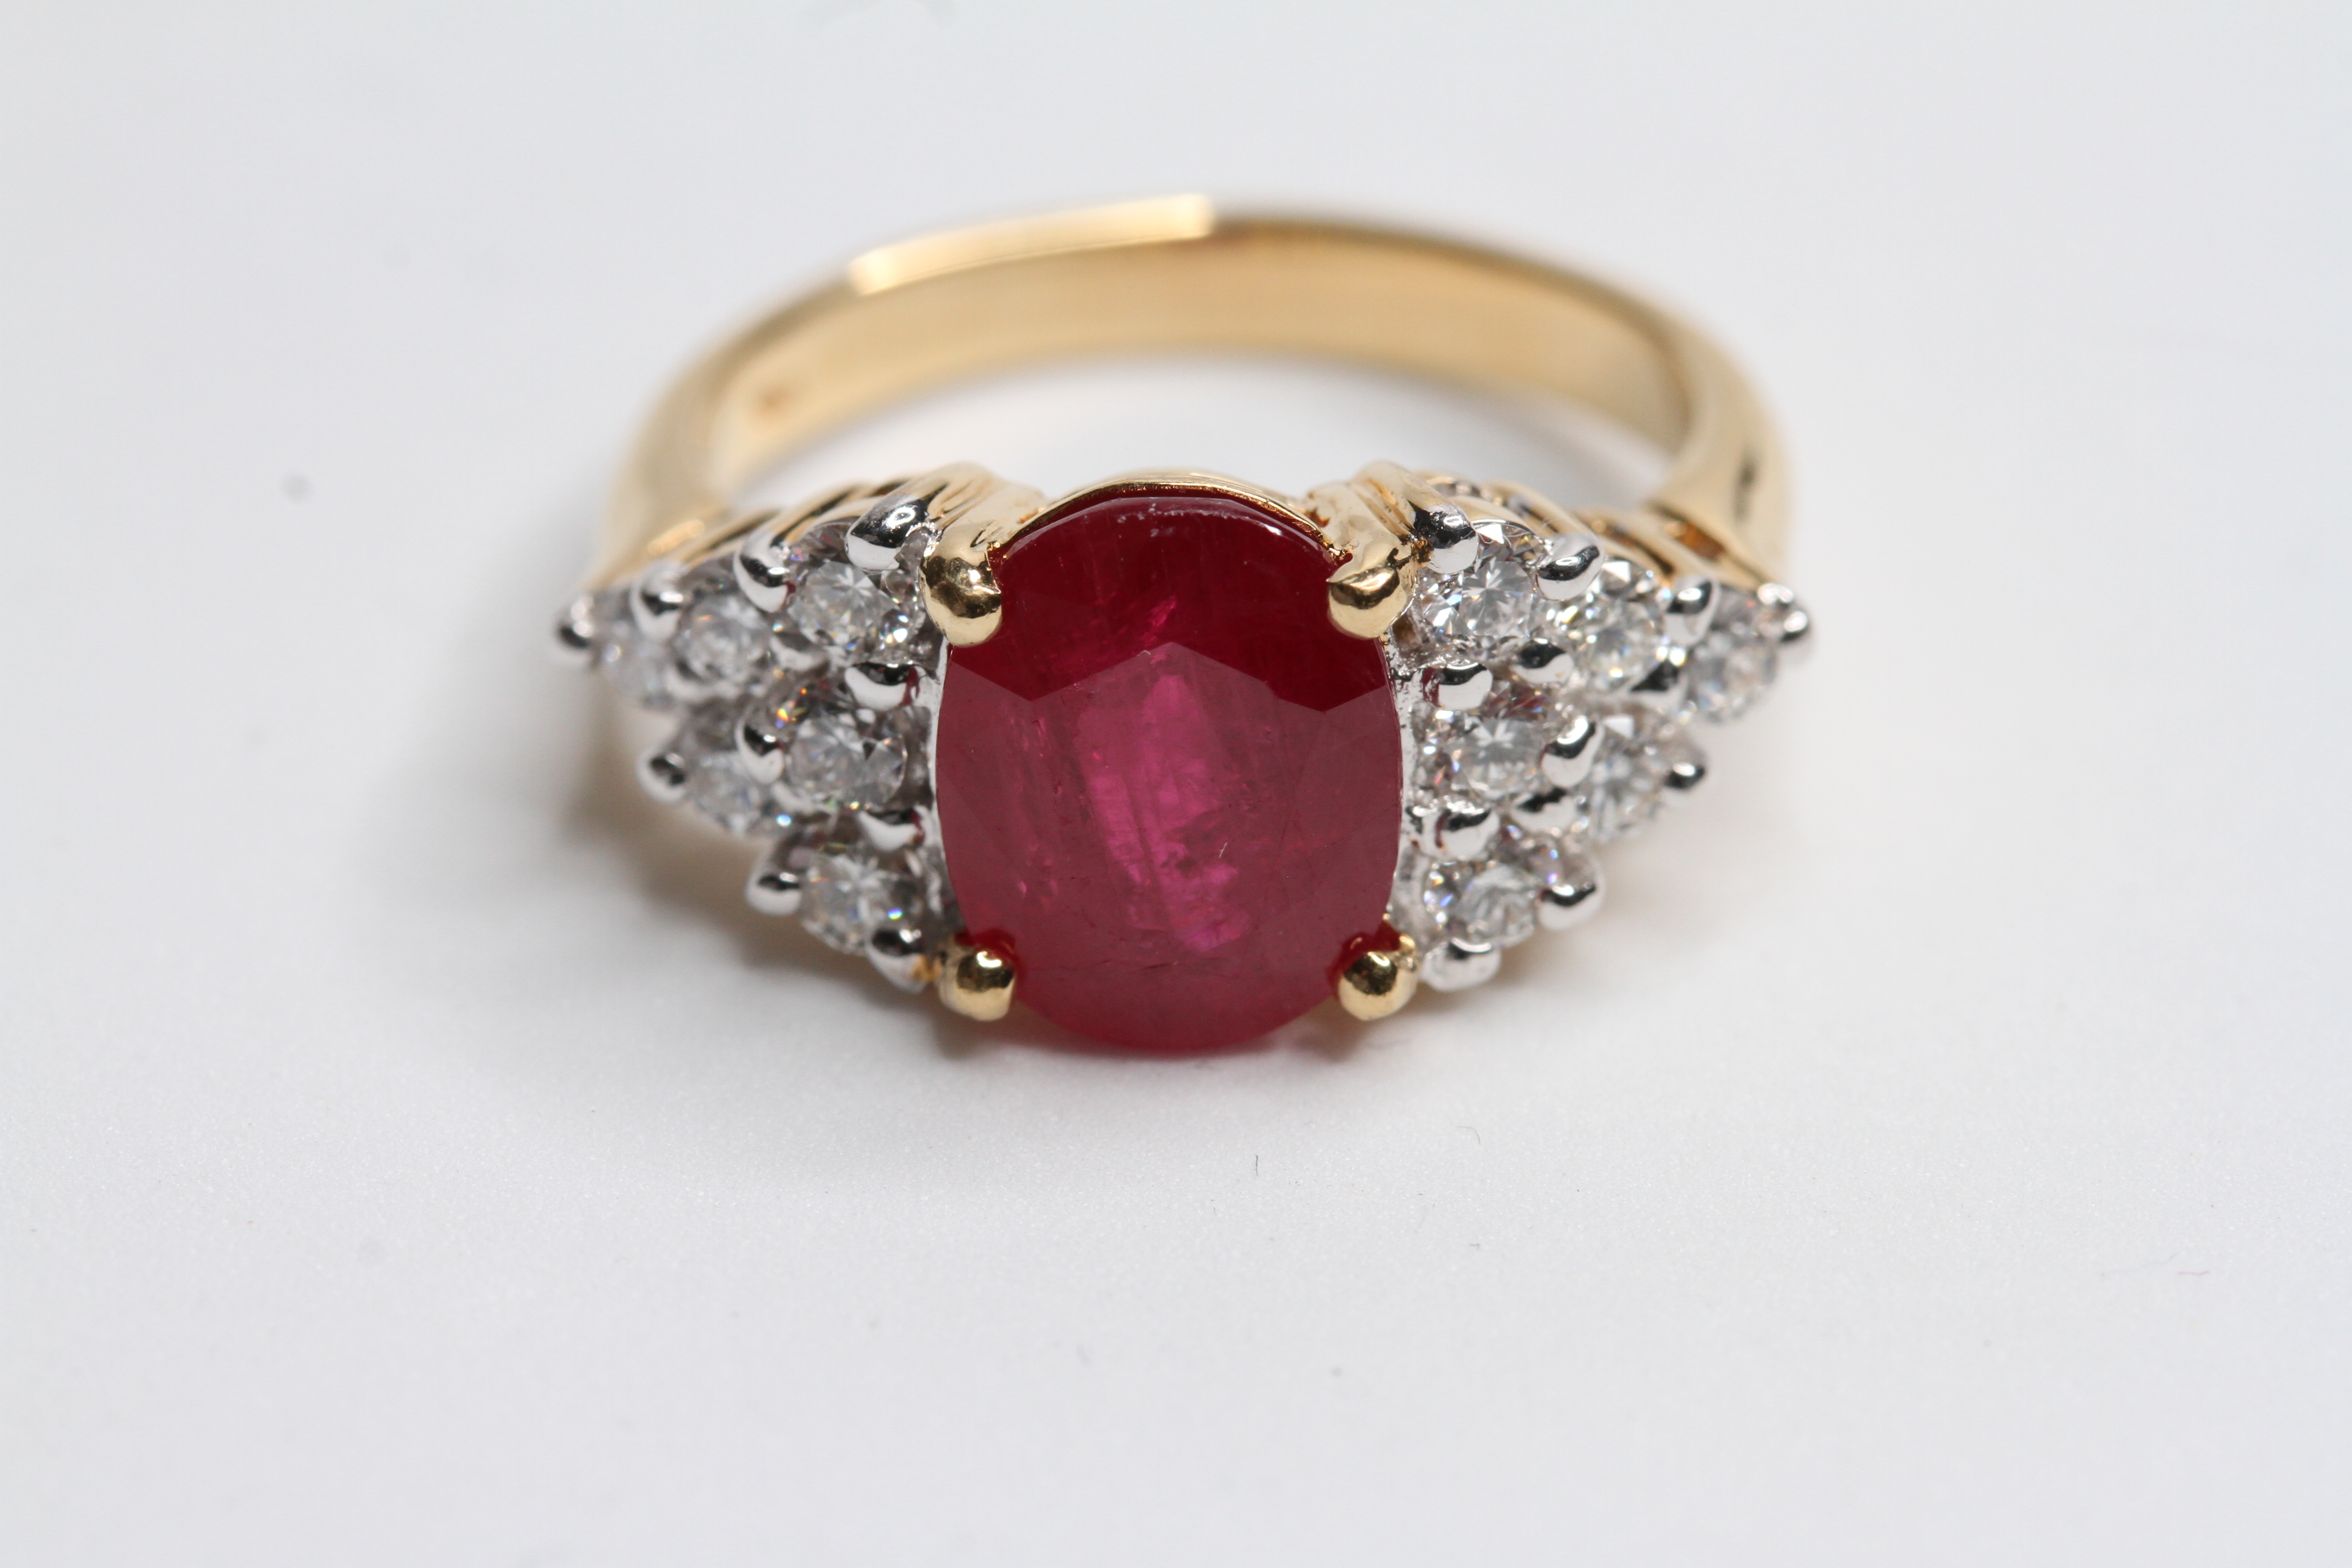 18YG 4 claw set oval ruby ring with triangular diamond set shoulders R3.69 D0.60 Ruby is flux